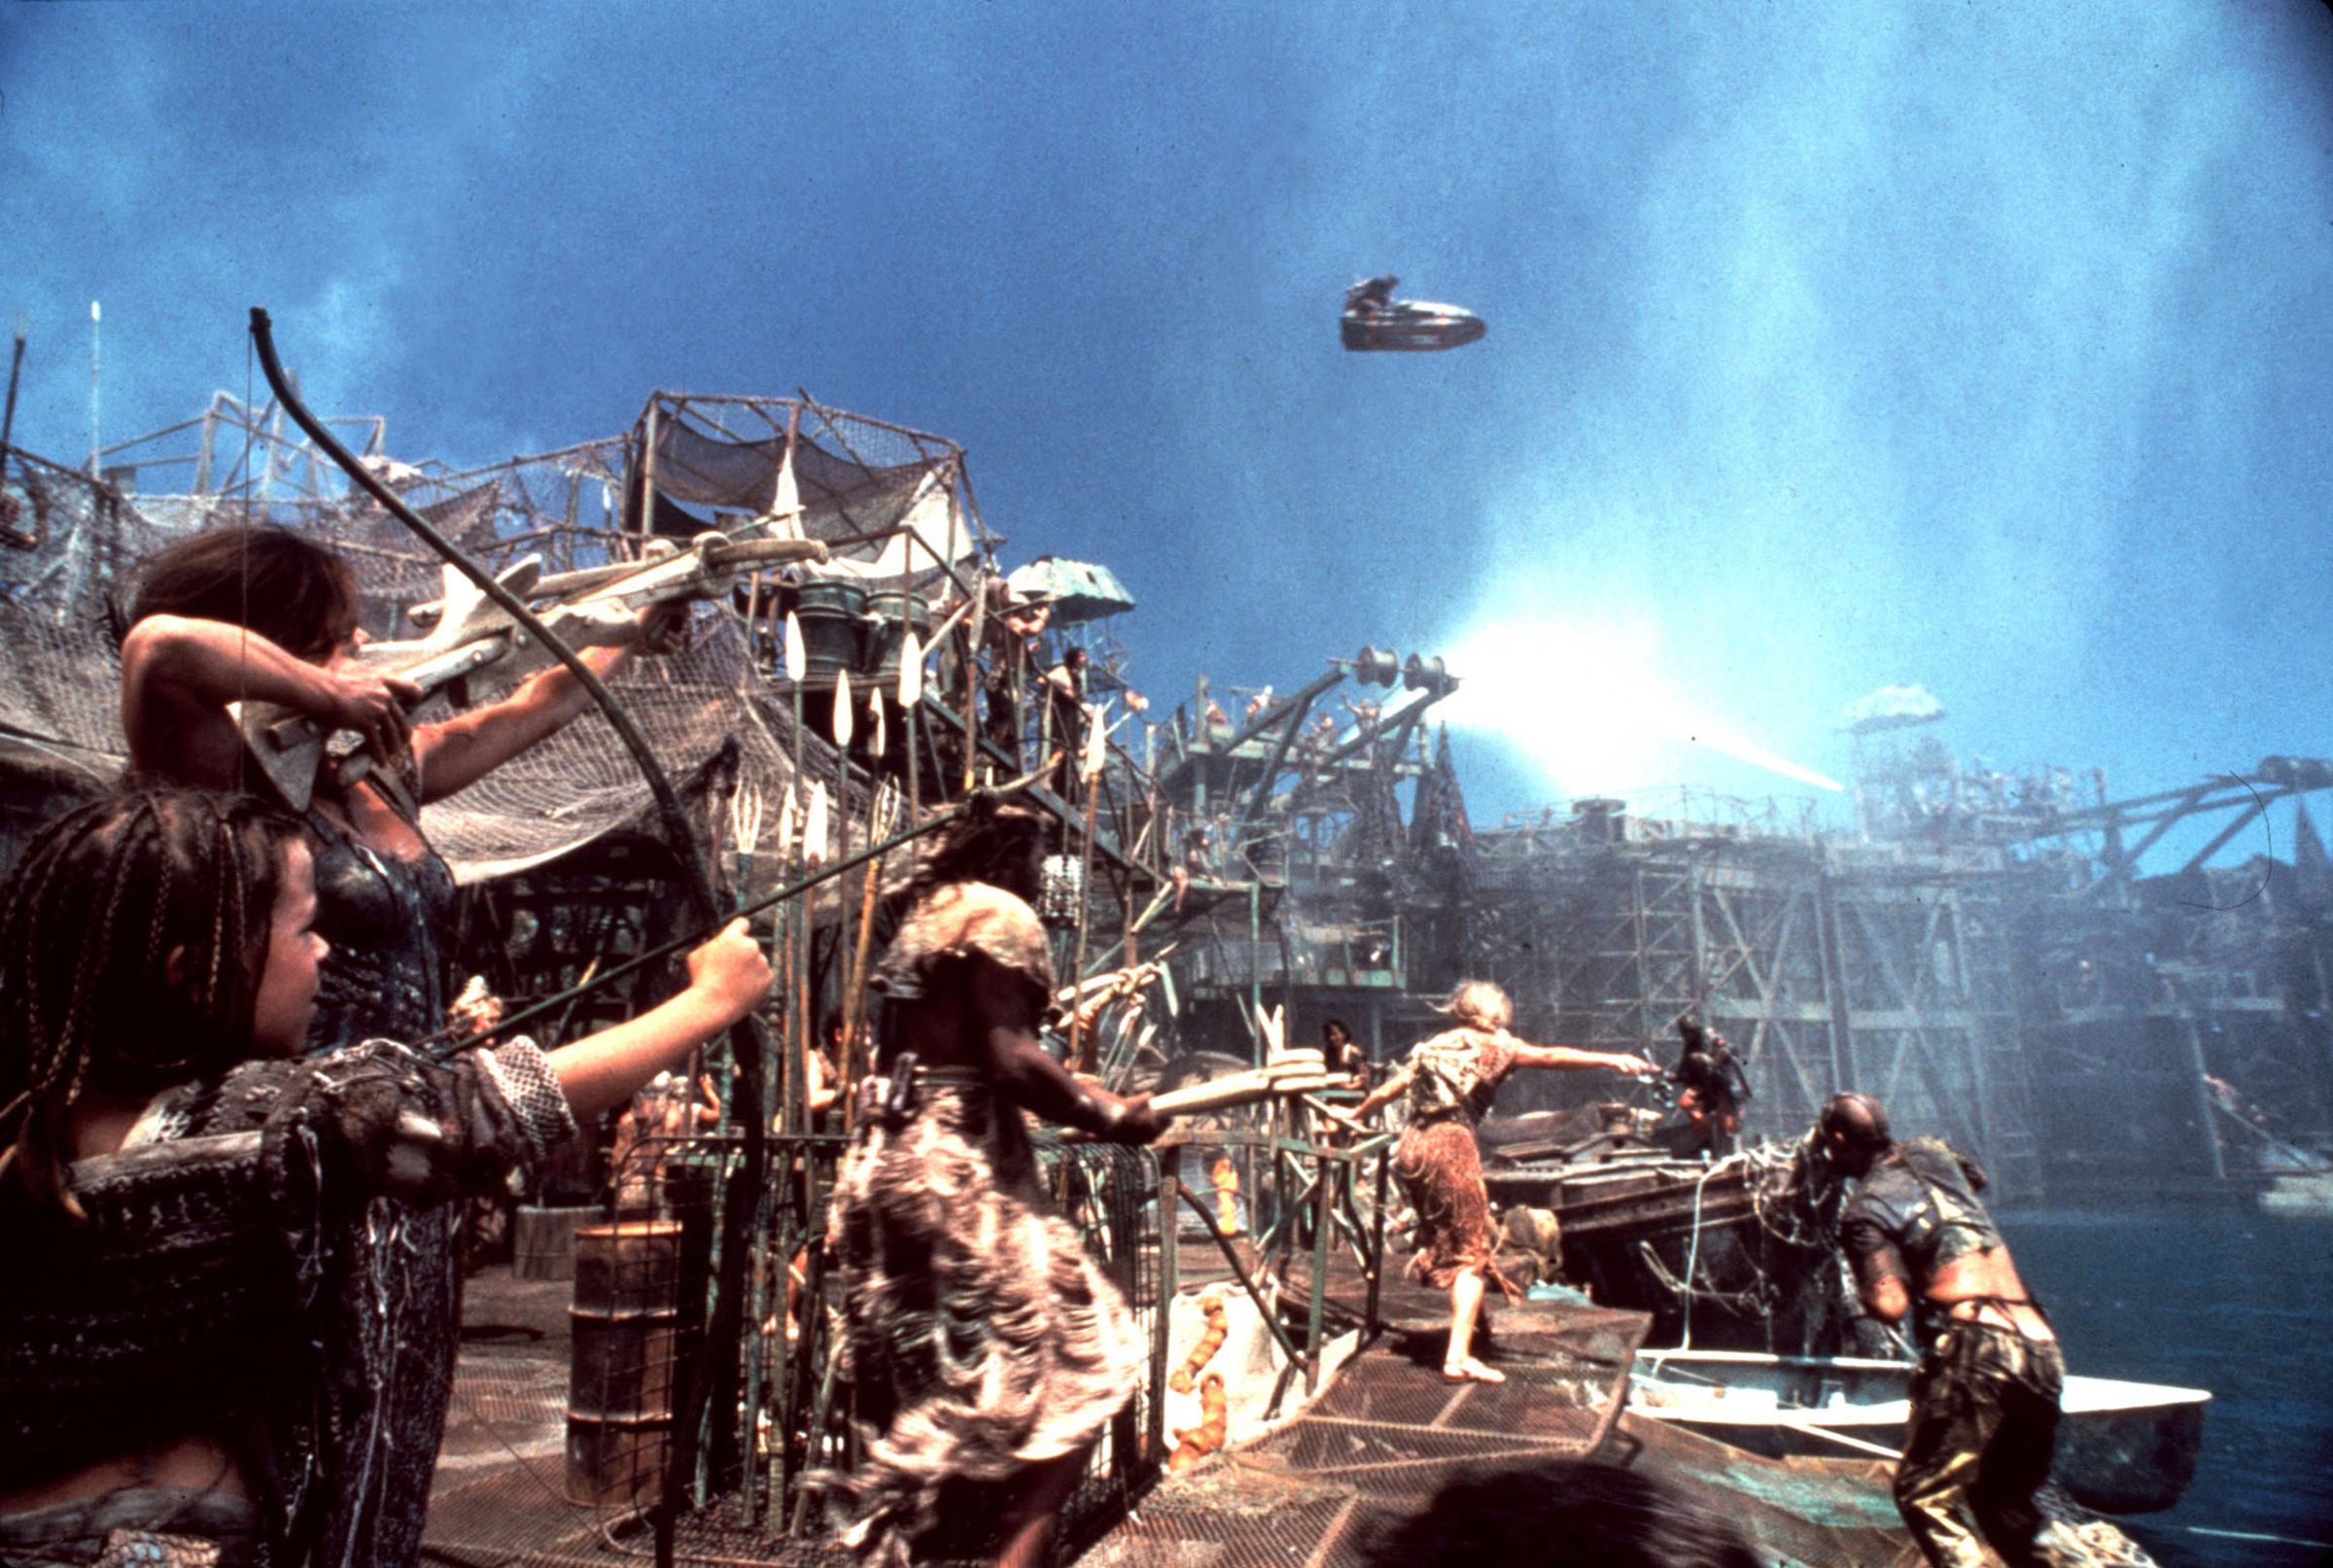 A still from the 1995 film 'Waterworld'. (Mary Evans—Ronald Grant/Everett Collection)